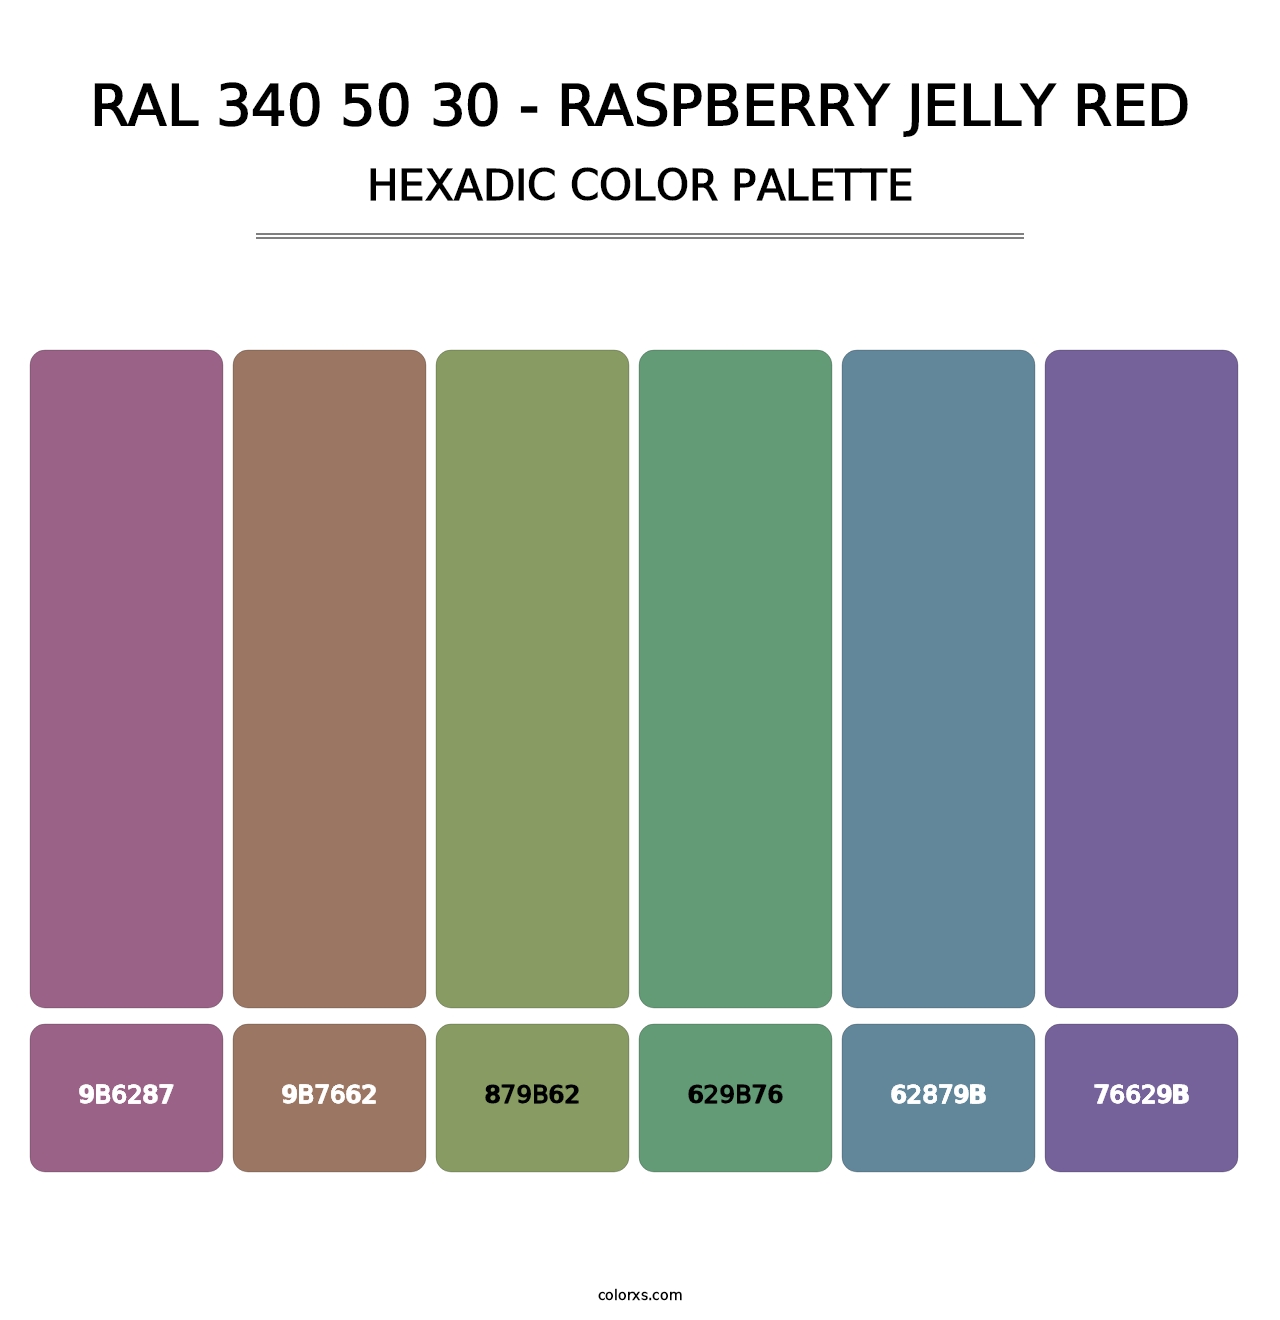 RAL 340 50 30 - Raspberry Jelly Red - Hexadic Color Palette